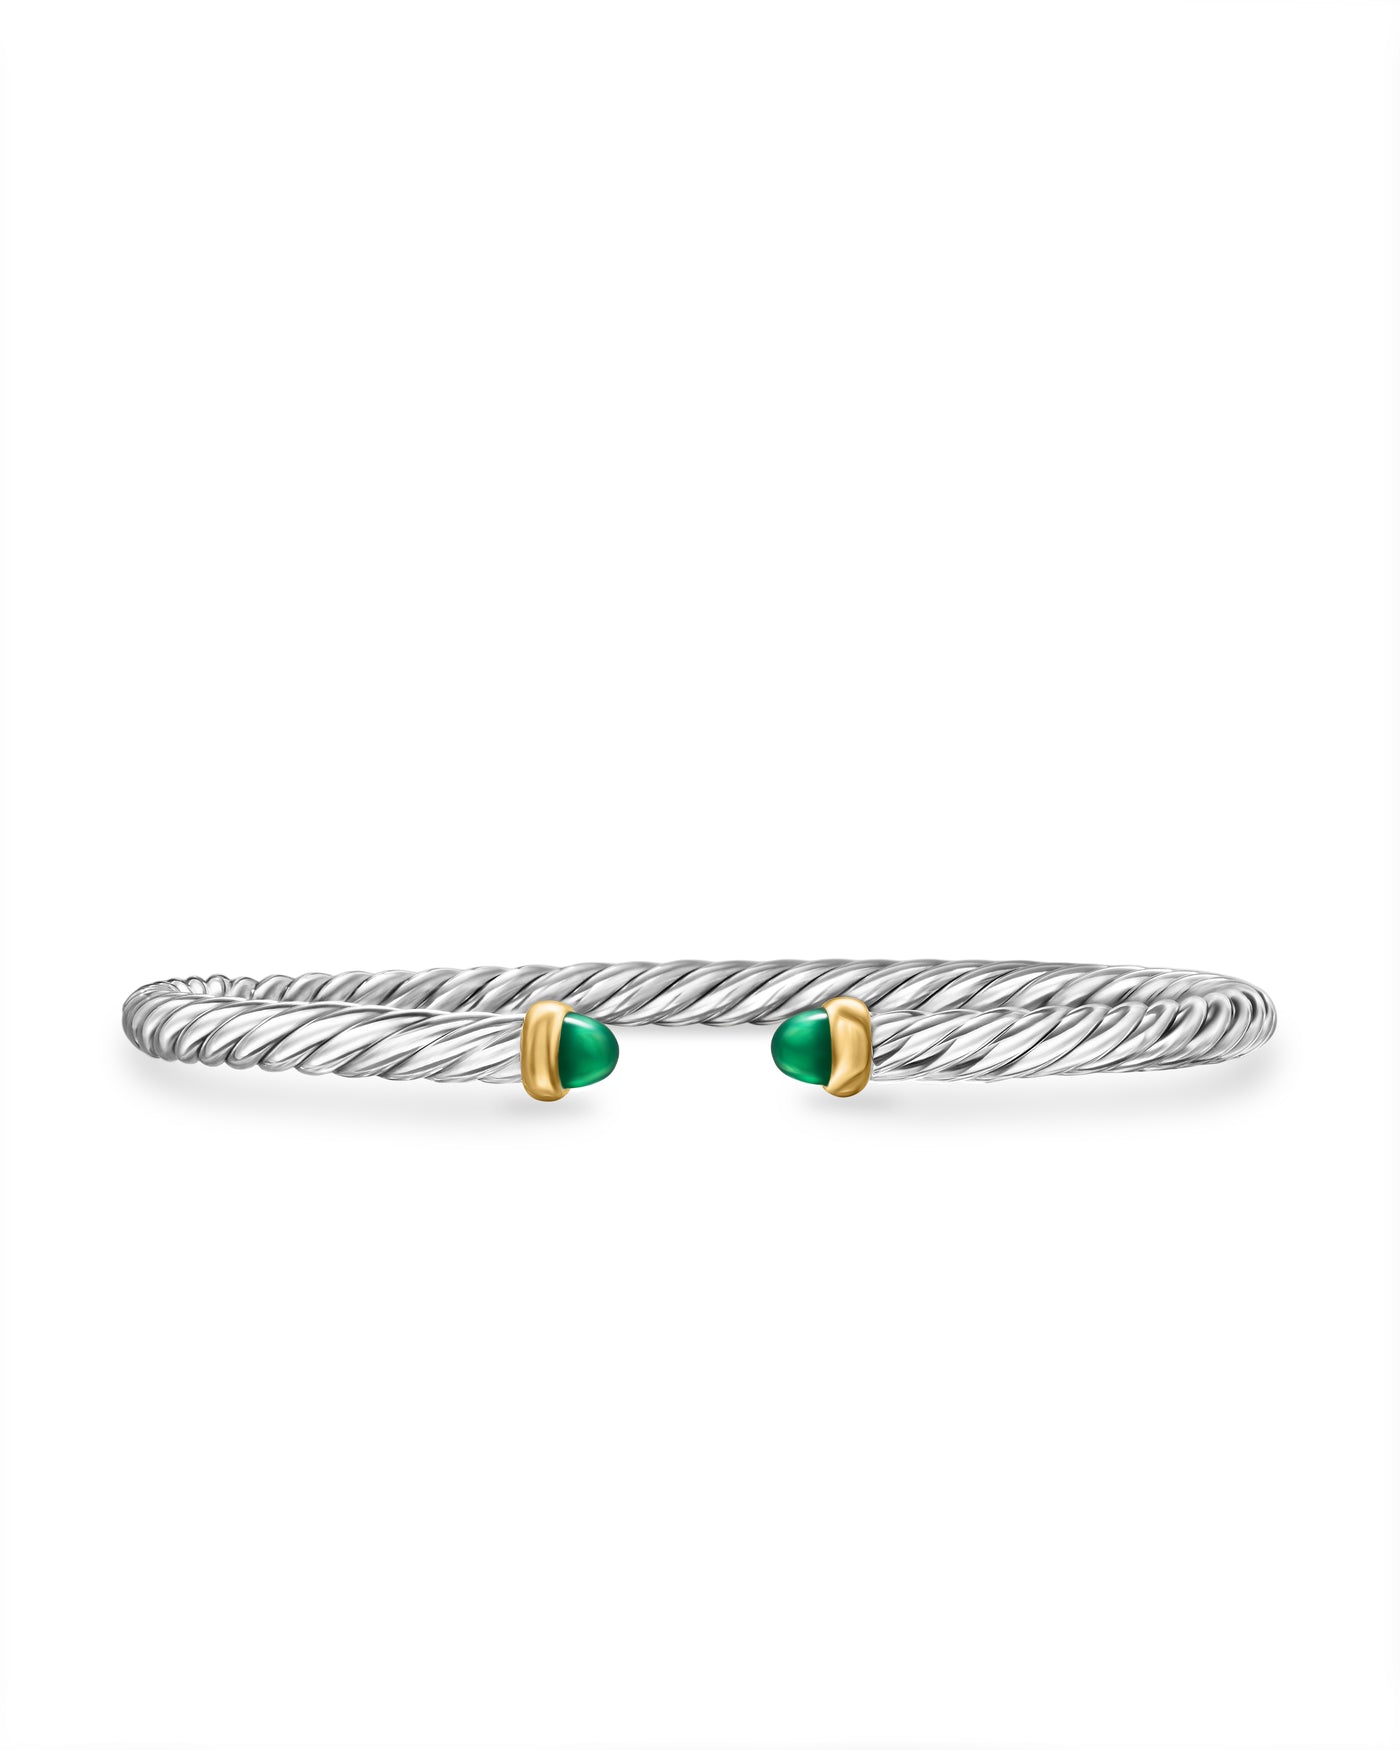 Modern Cable Bracelet in Sterling Silver with 14K Yellow Gold and Green Onyx\, 4mm